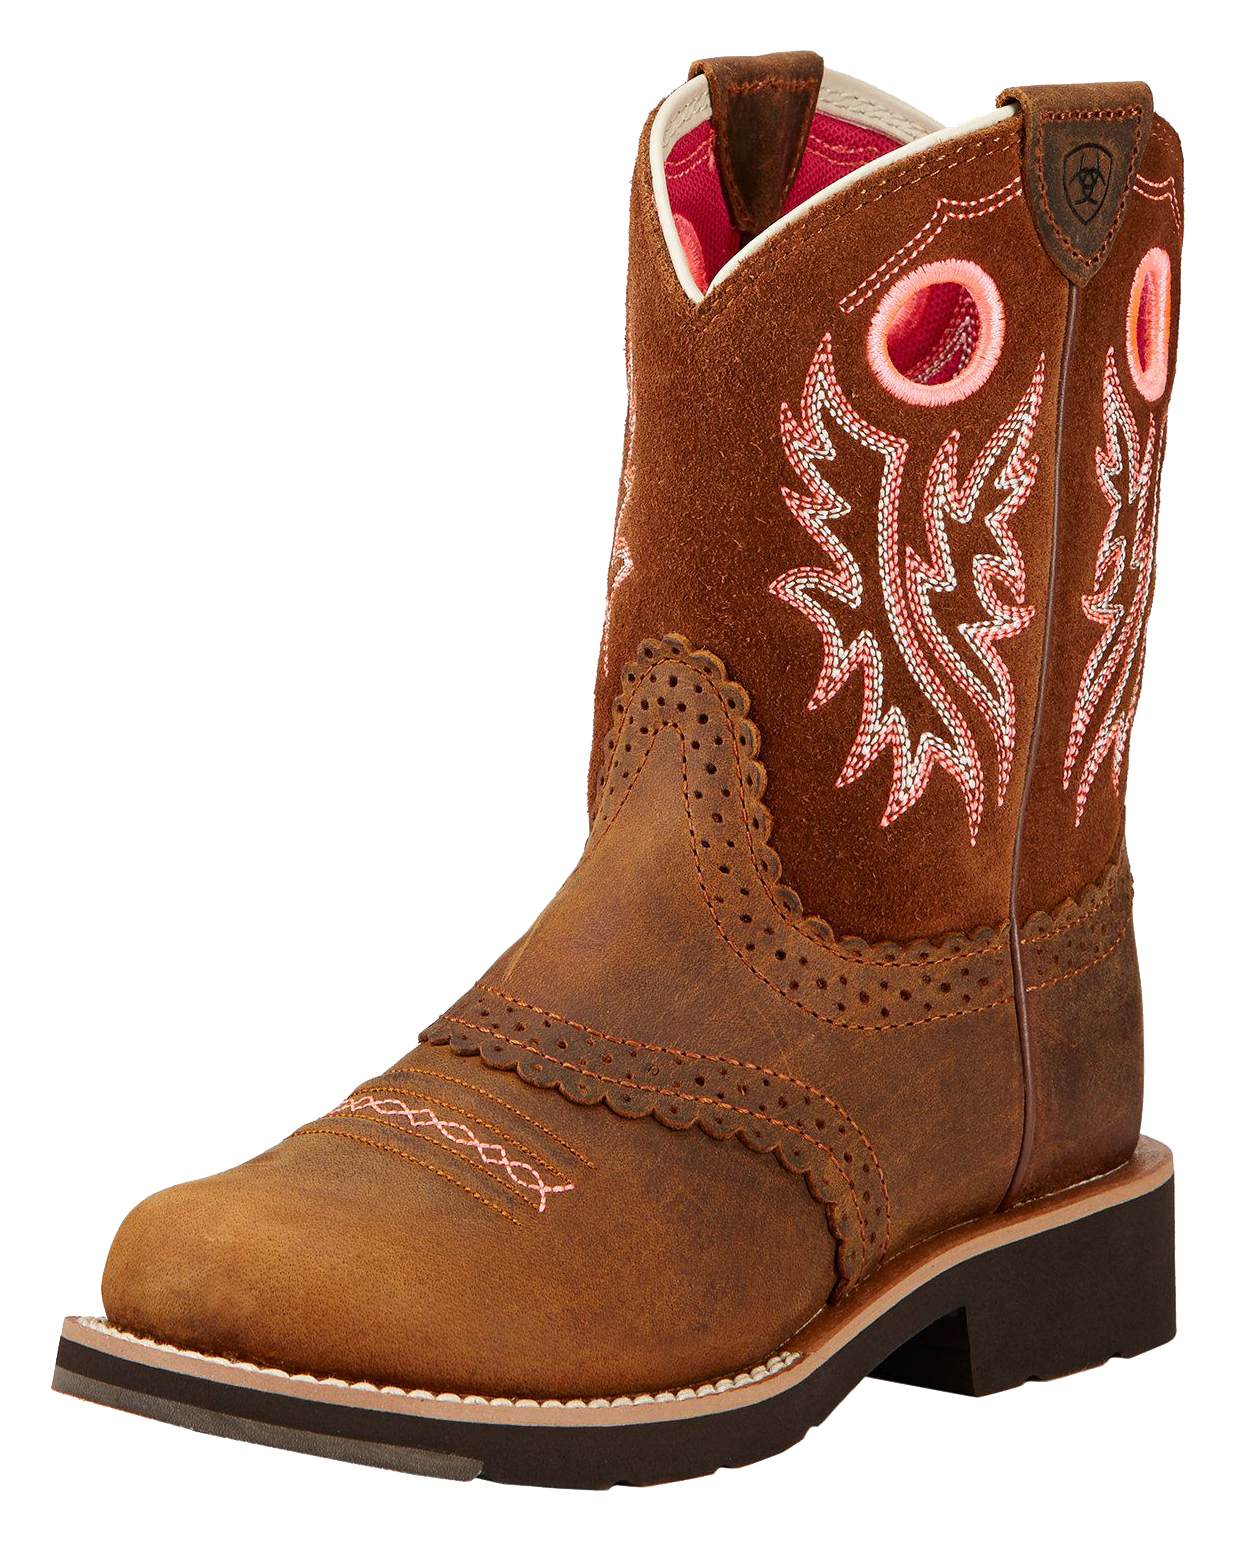 Ariat Fatbaby Cowgirl Western Boots for Kids - Powder Brown - 12.5 Kids